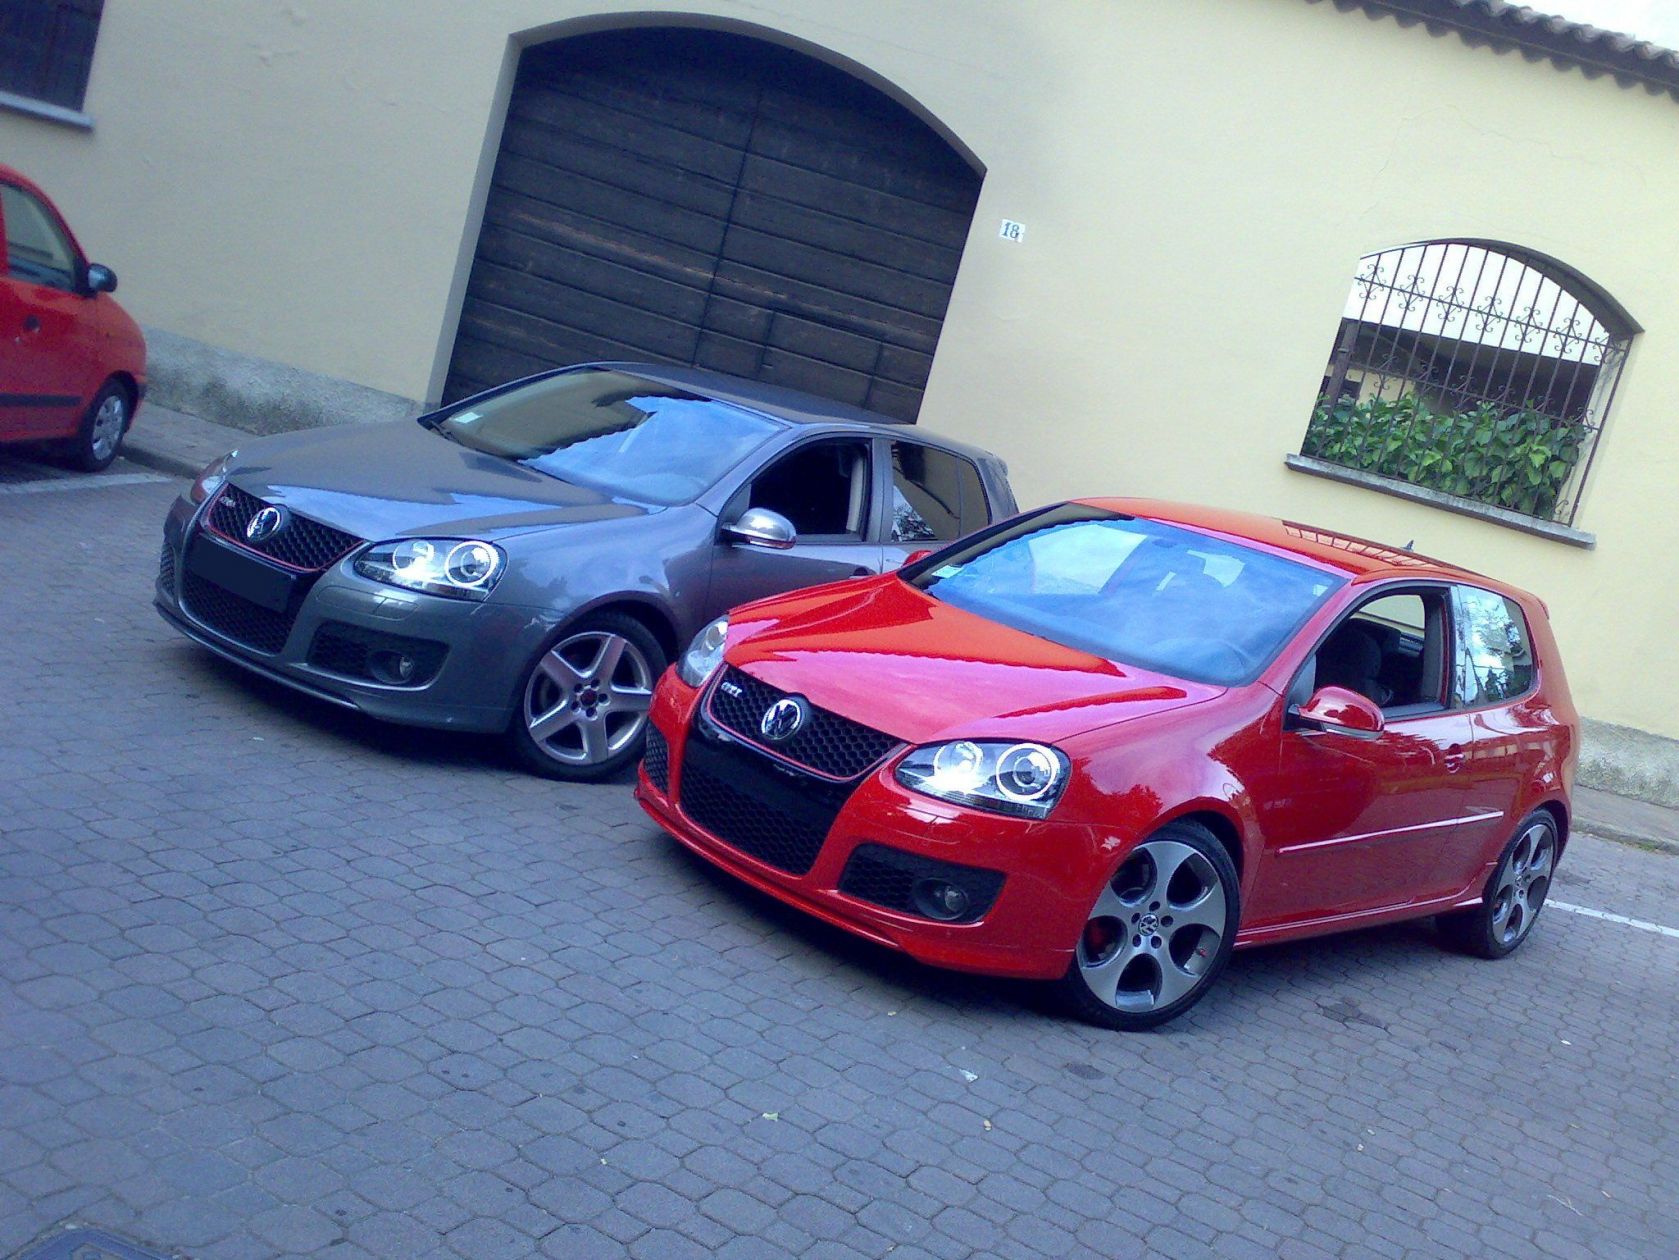 Fromy's & Andre's GTIs (3)
